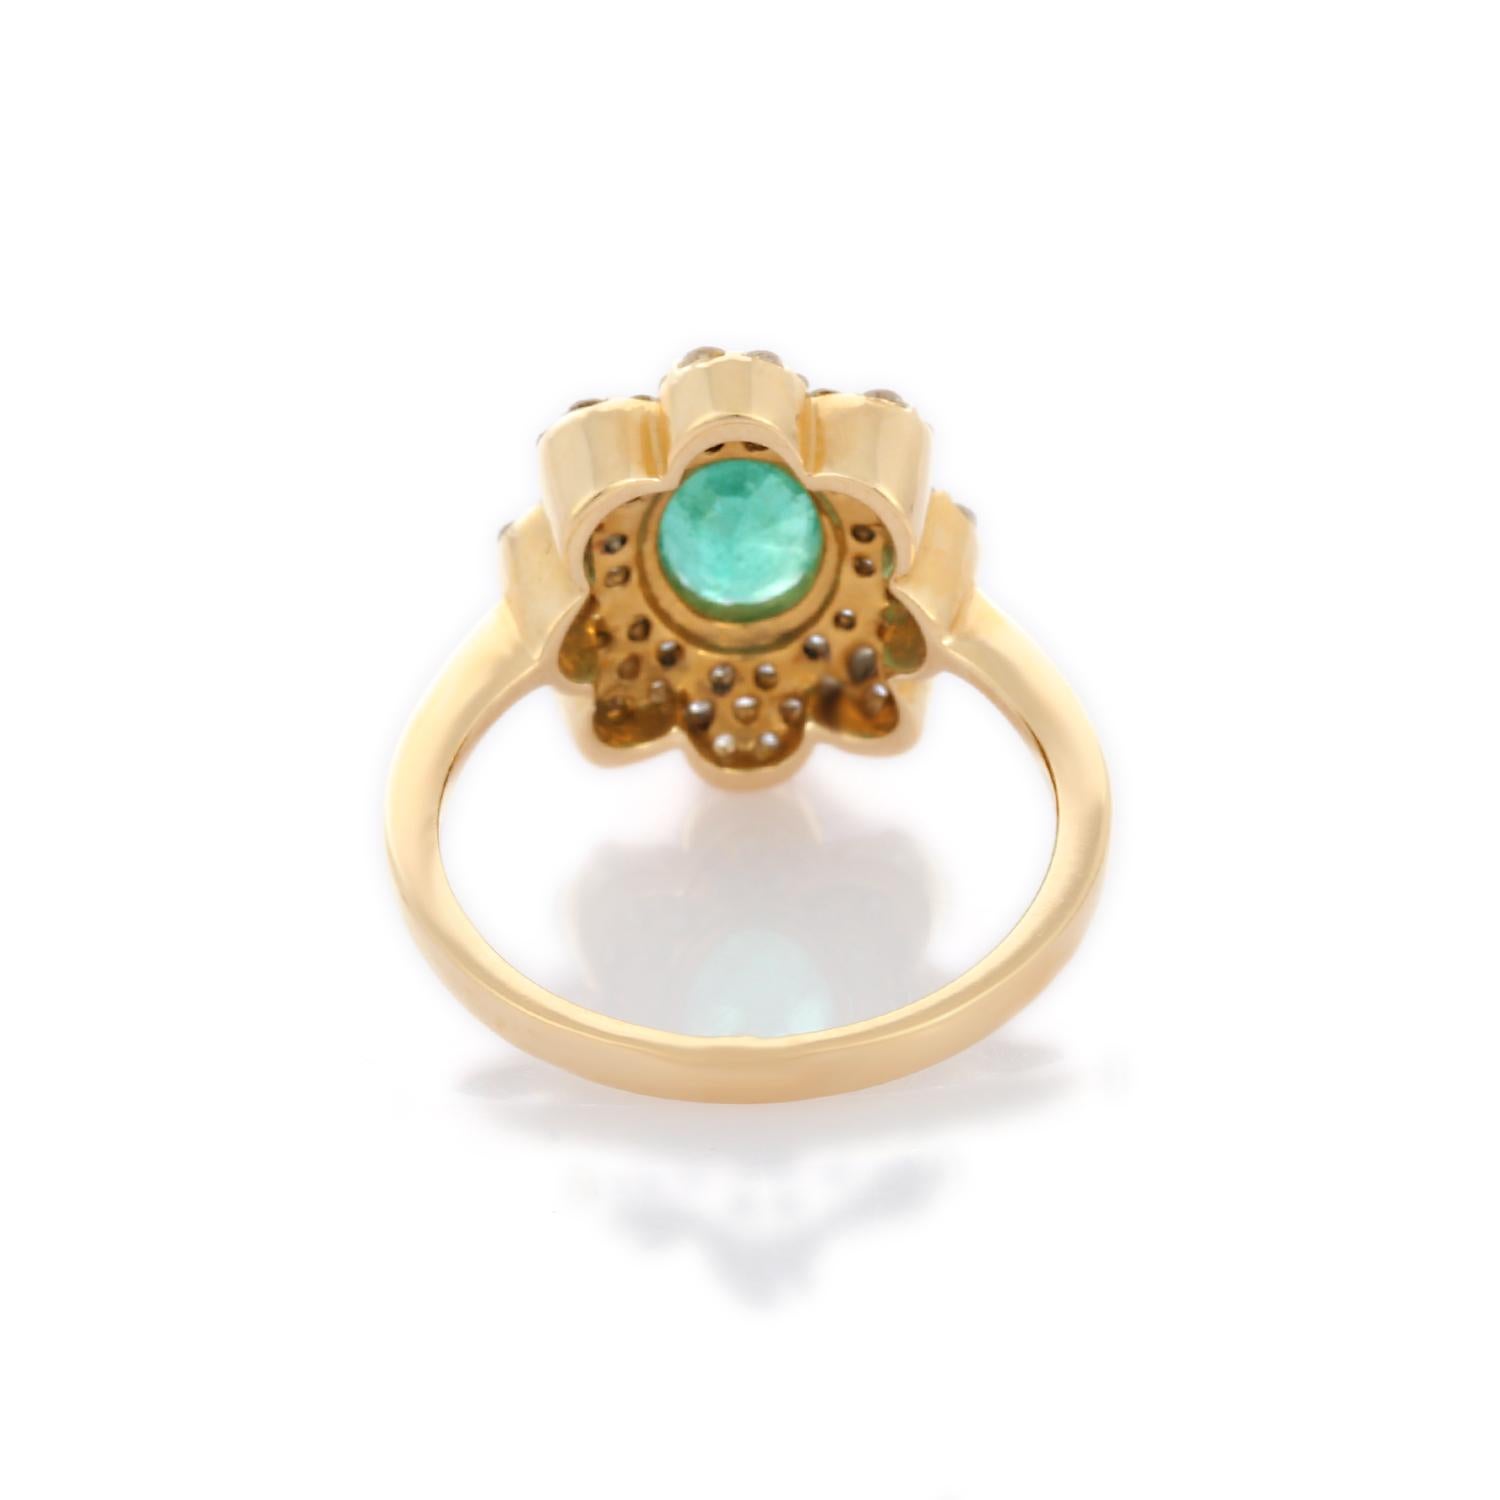 For Sale:  Exquisite 14K Solid Yellow Gold Emerald Ring with Clustered Diamonds 5